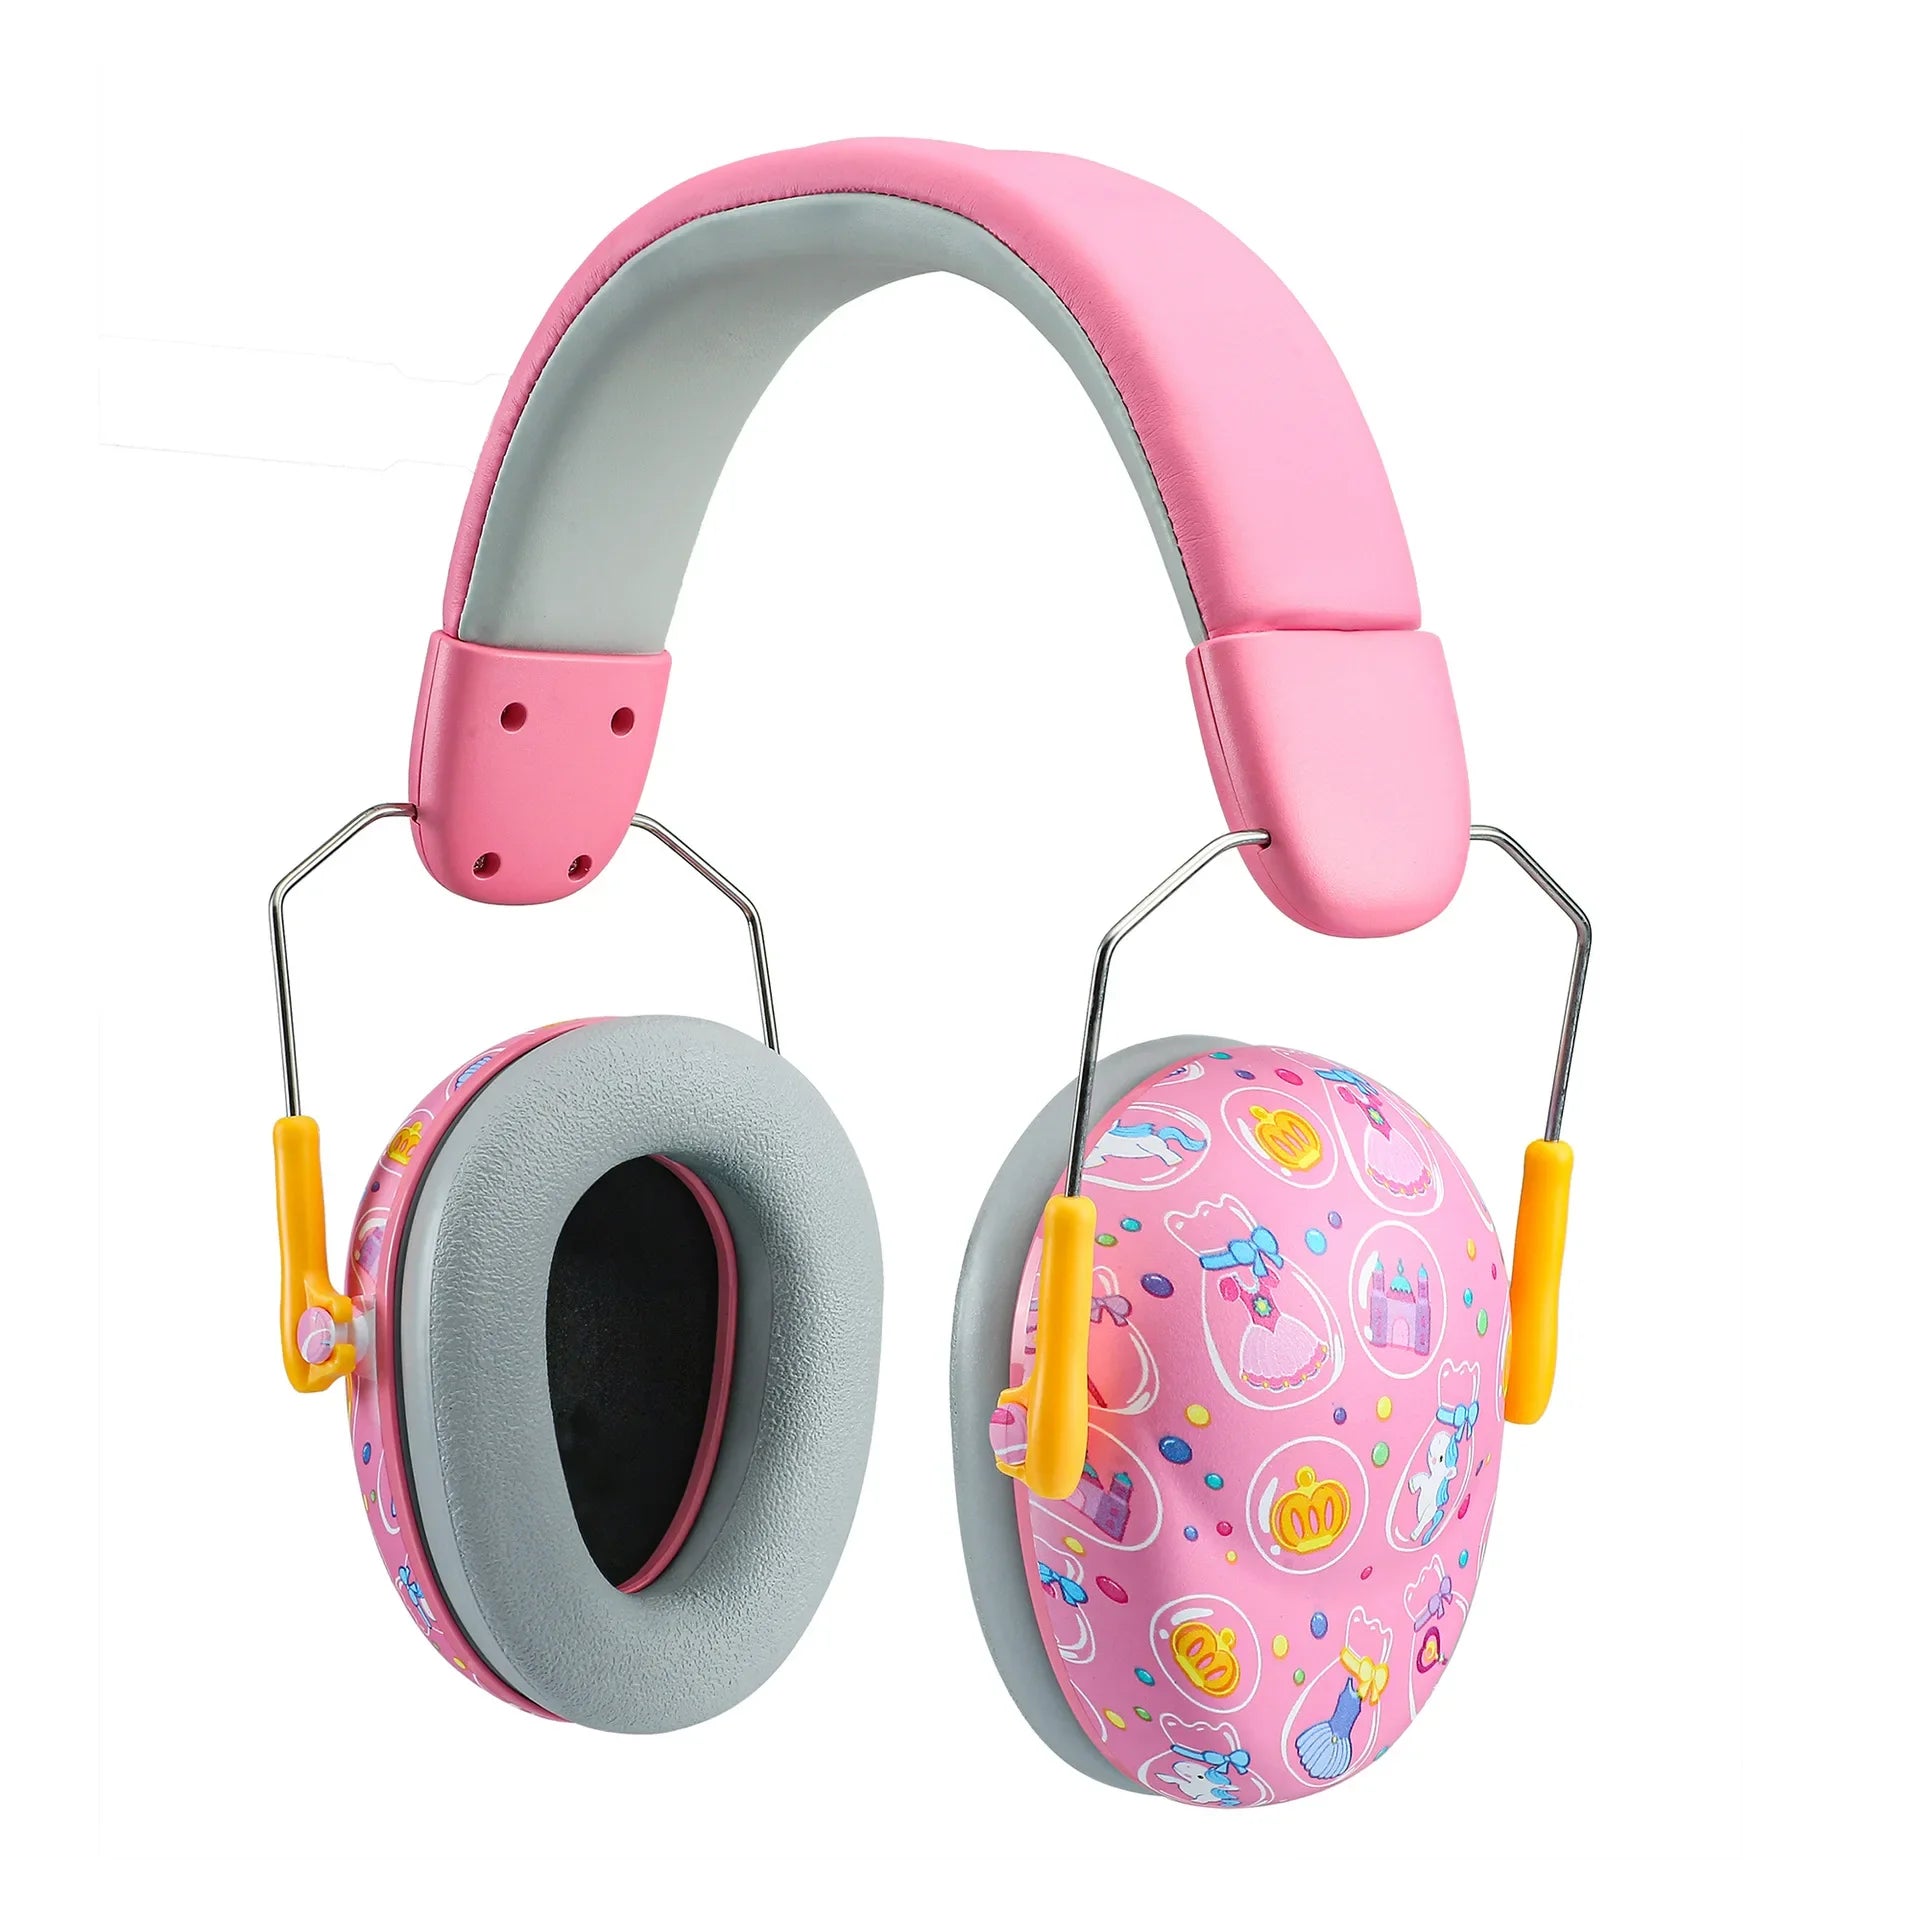 ARM NEXT Kid Ear Protection Baby Noise Earmuffs Noise Reduction Ear Defenders earmuff for children Adjustable nrr 25db Safety